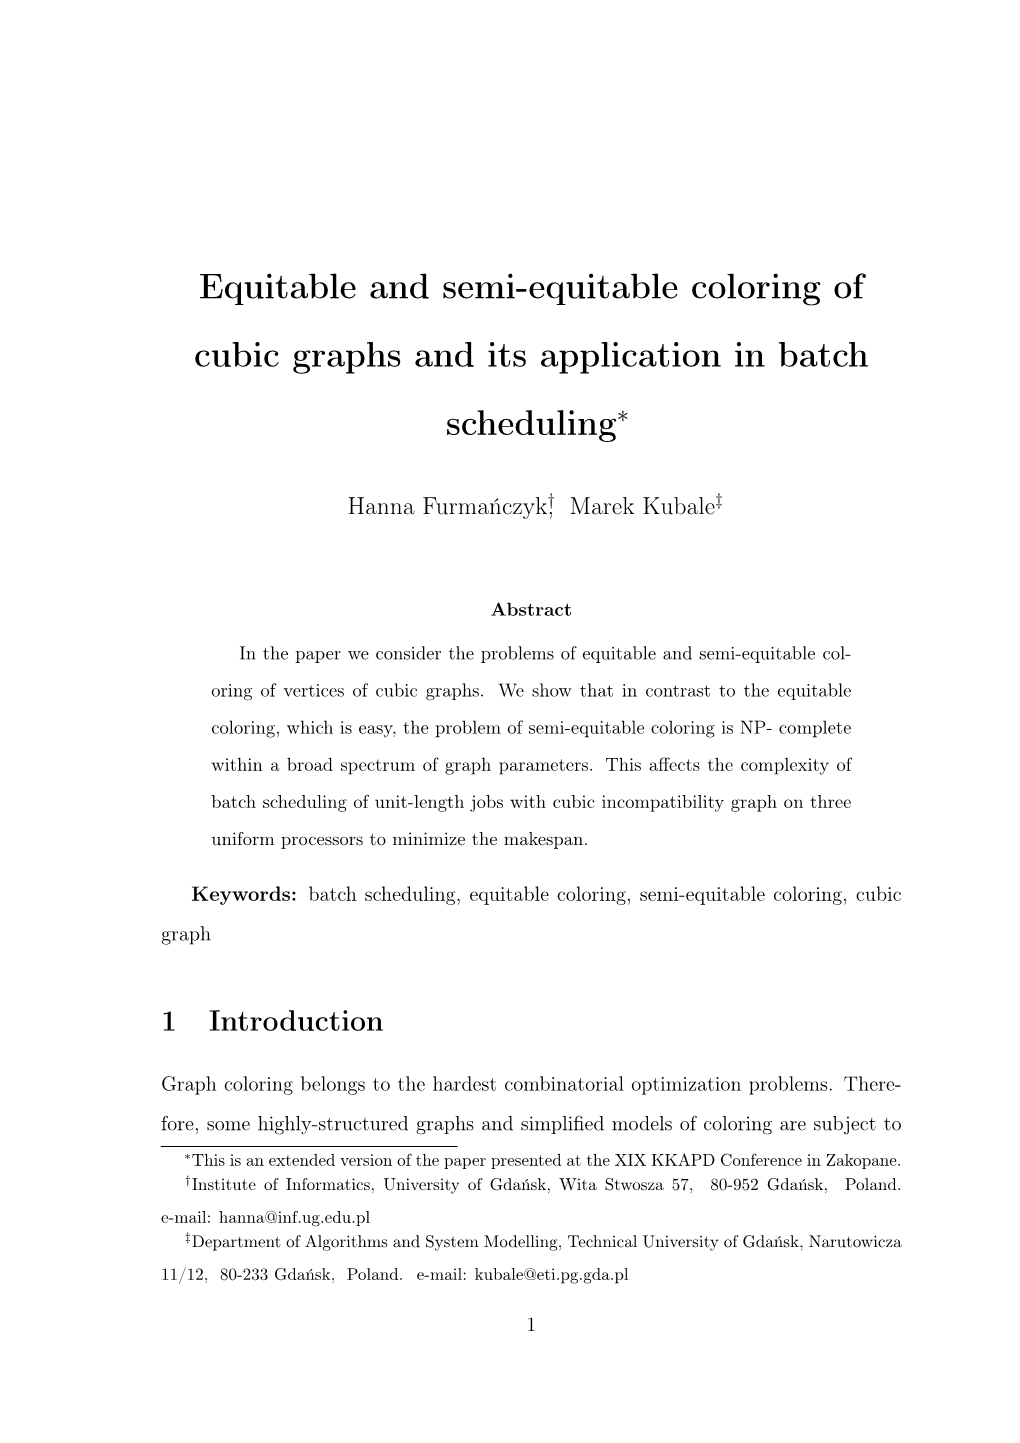 Equitable and Semi-Equitable Coloring of Cubic Graphs and Its Application in Batch Scheduling∗